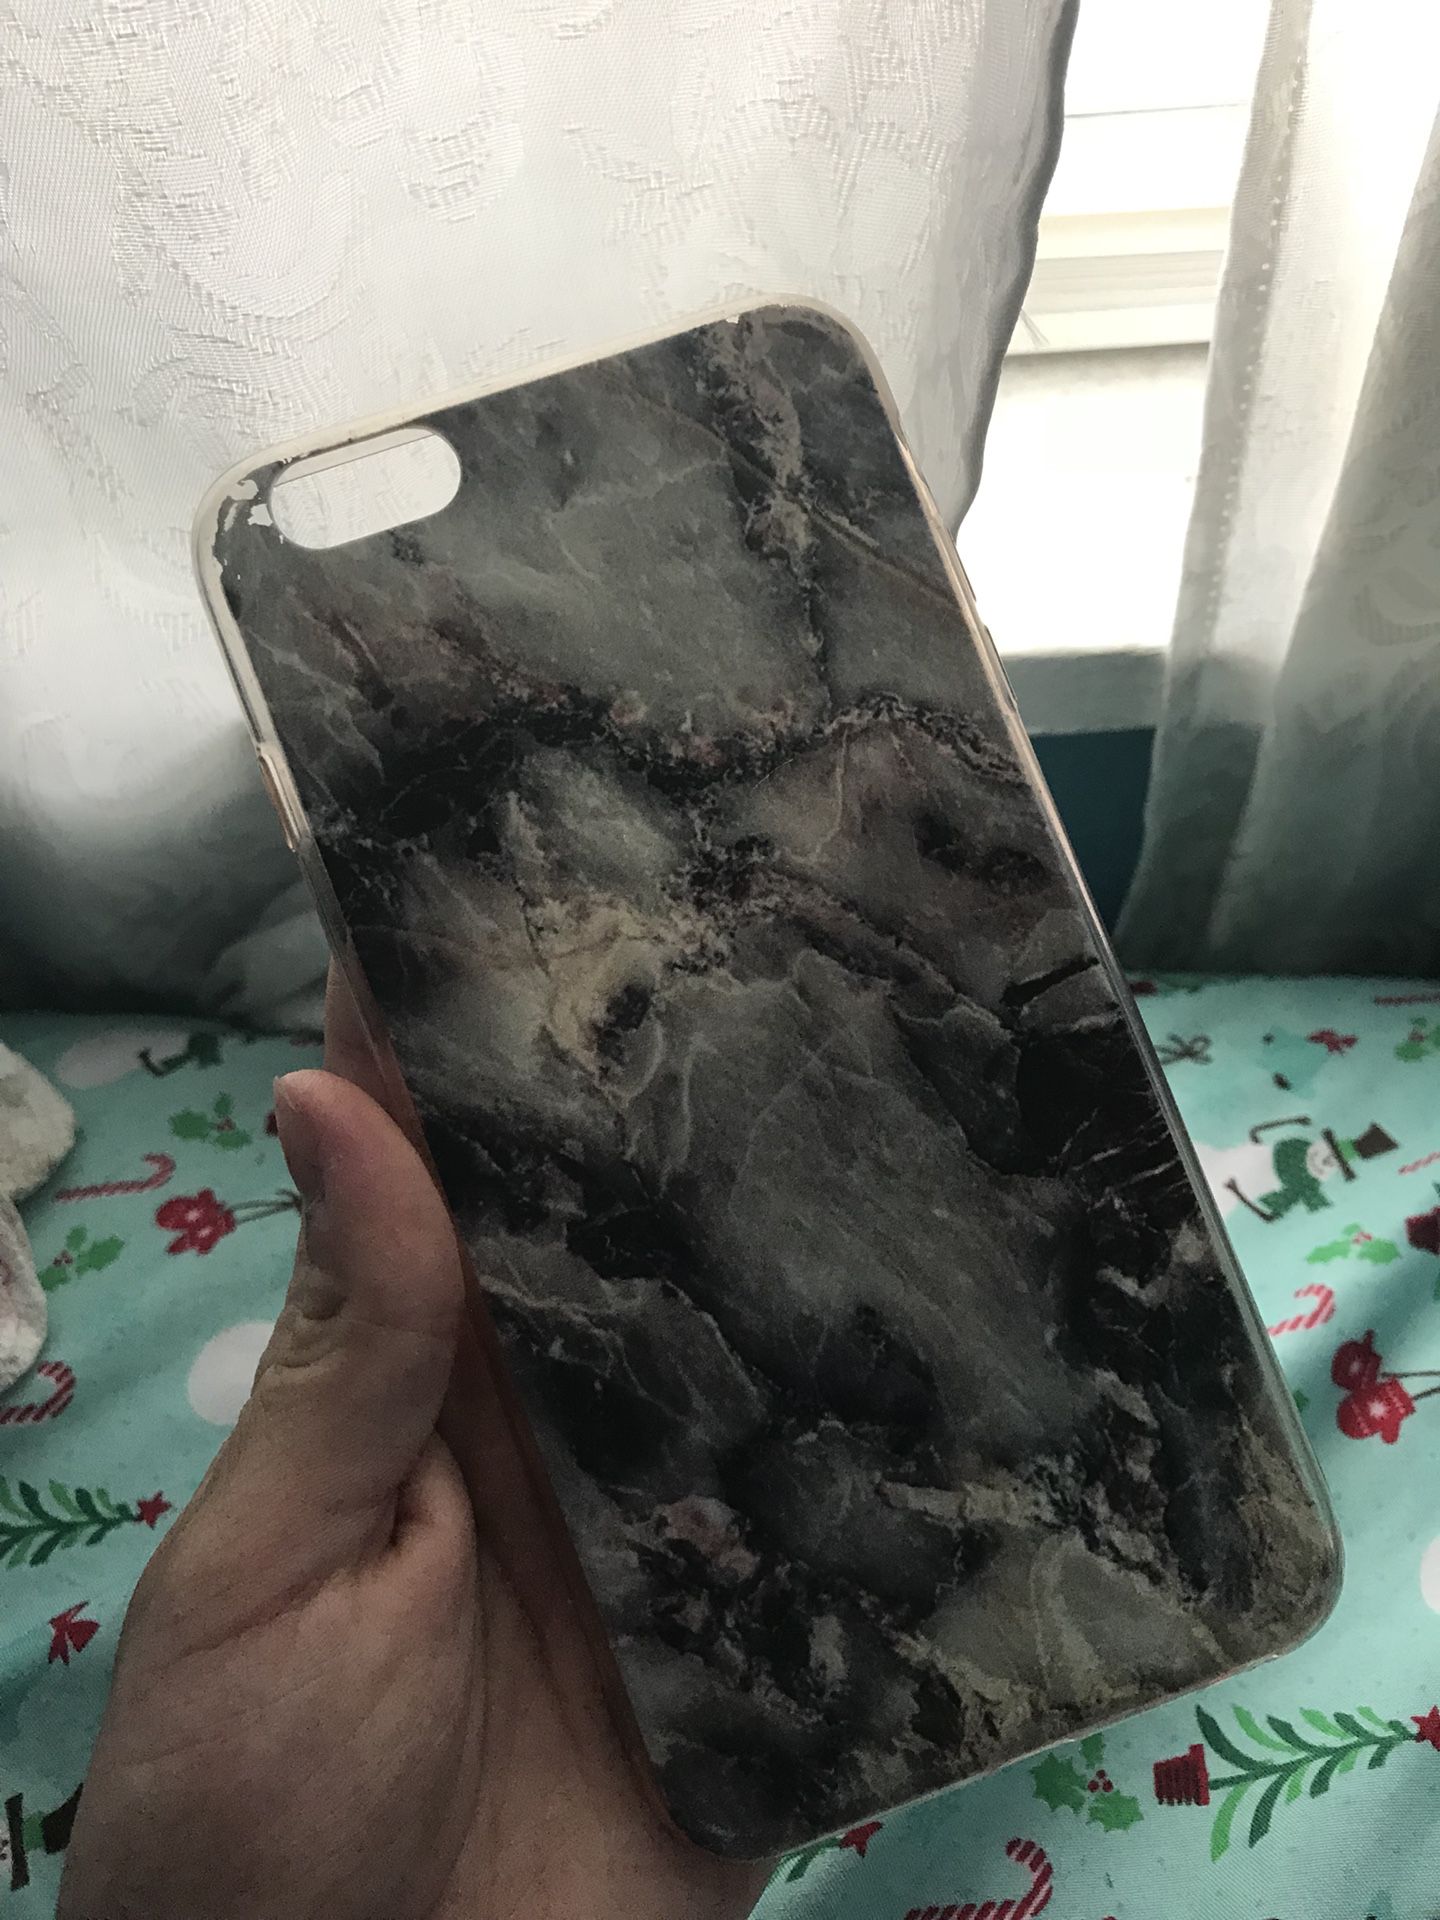 Marble phone case